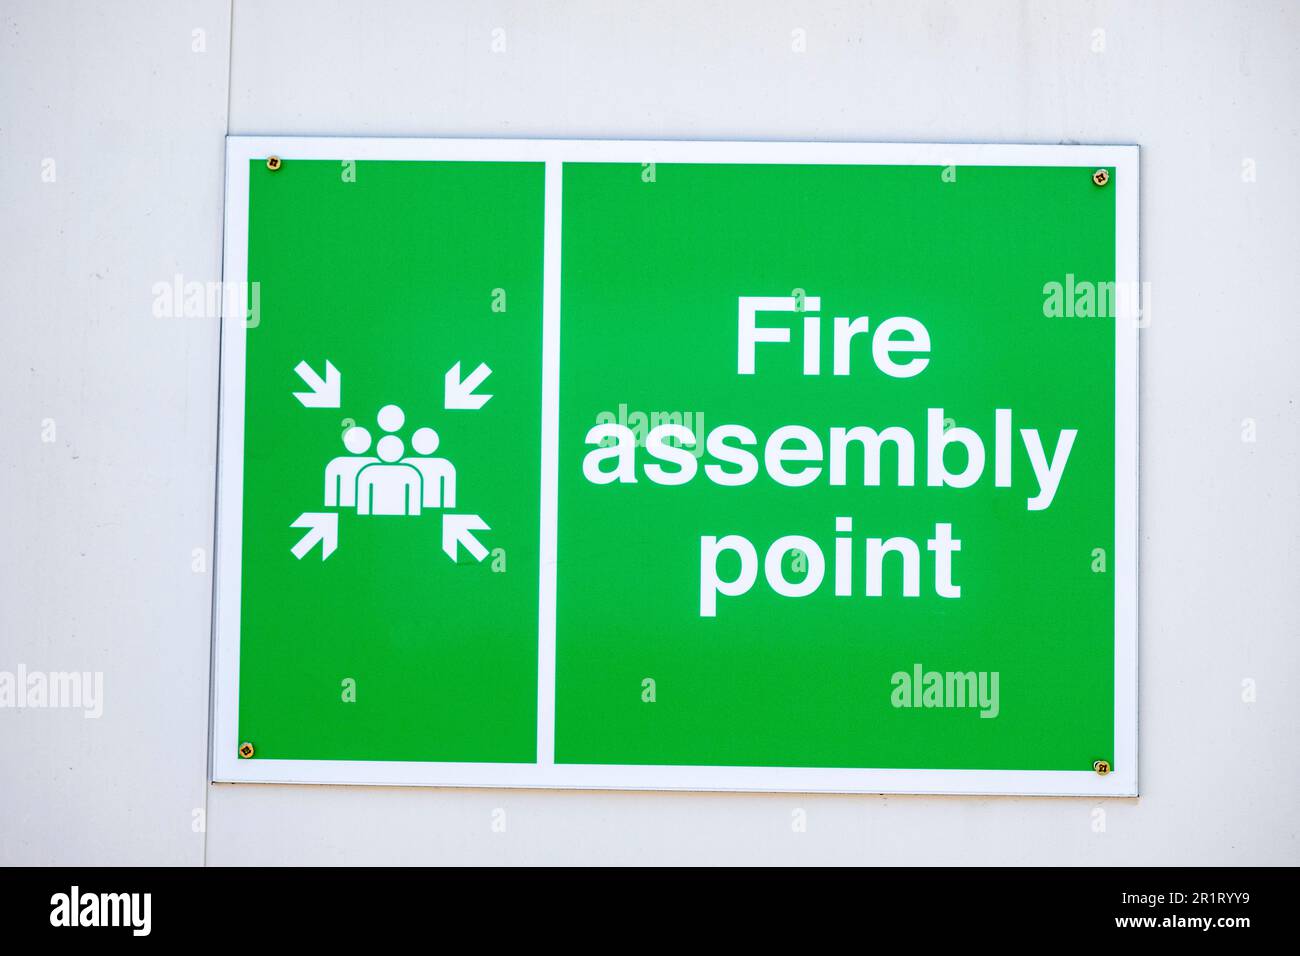 Fire assembly point, Health & Safety sign UK Stock Photo